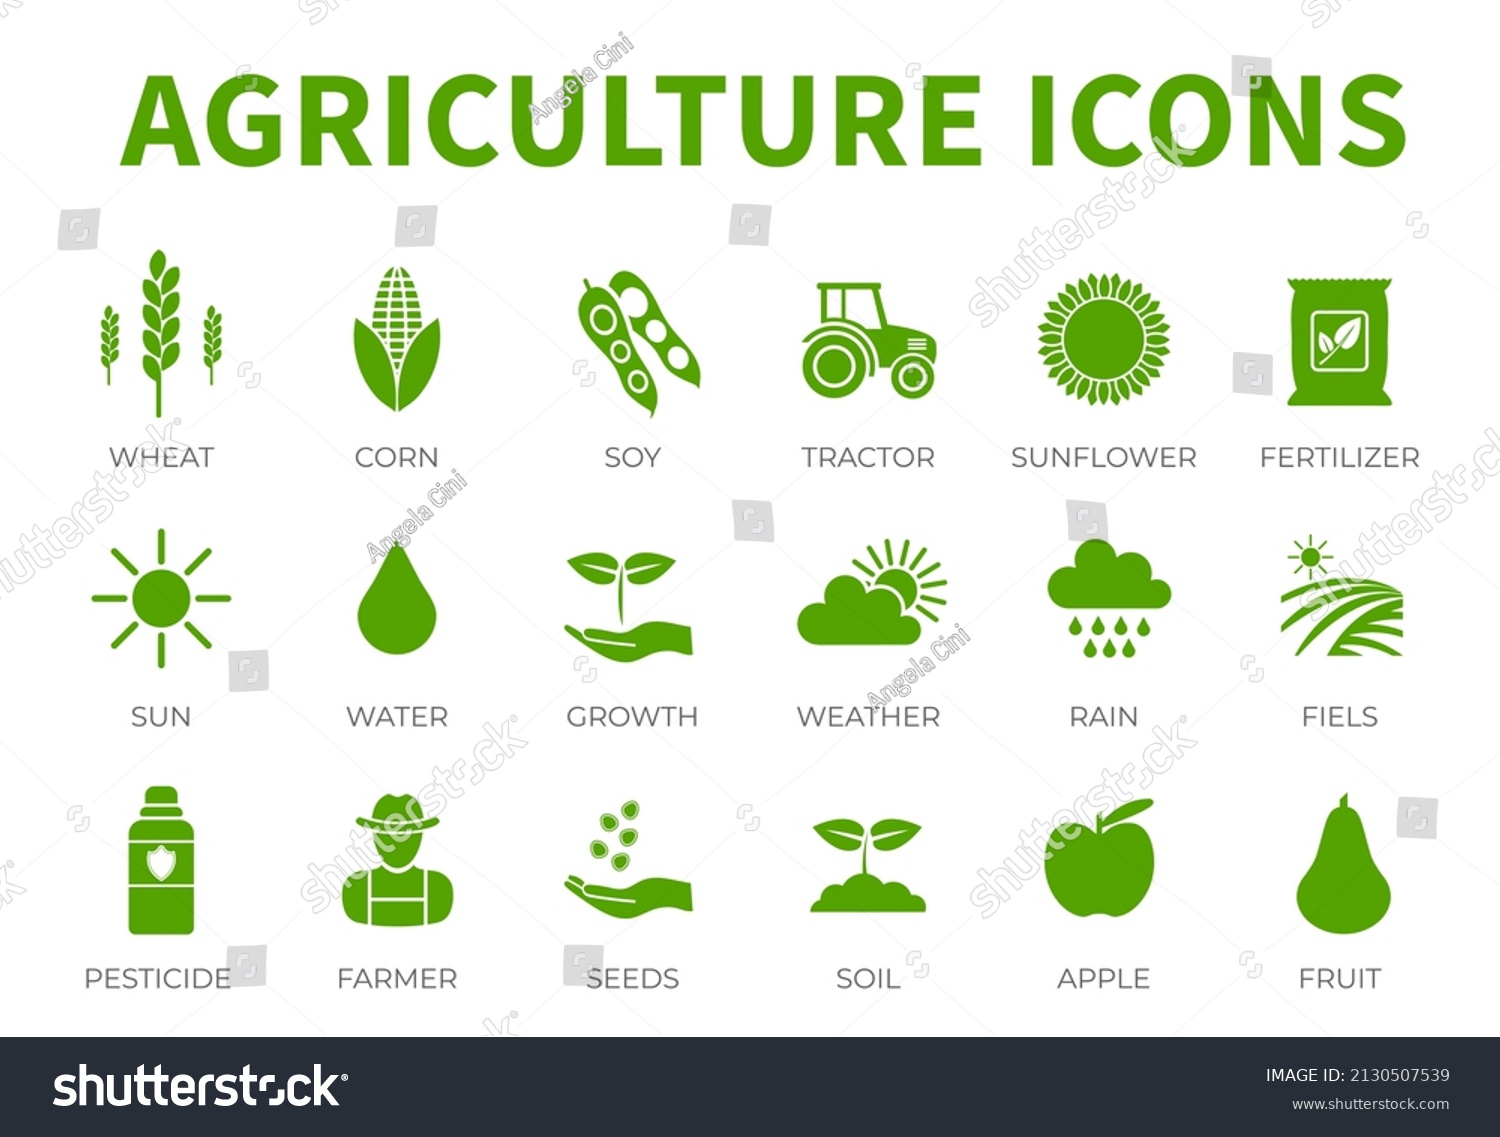 Agriculture Icon Set of Wheat, Corn, Soy, Tractor, Sunflower, Fertilizer, Sun, Water, Growth, Weather, Rain, Fields, Pesticide, Farmer, Seeds, Soil, Apple, Fruit Icons. #2130507539